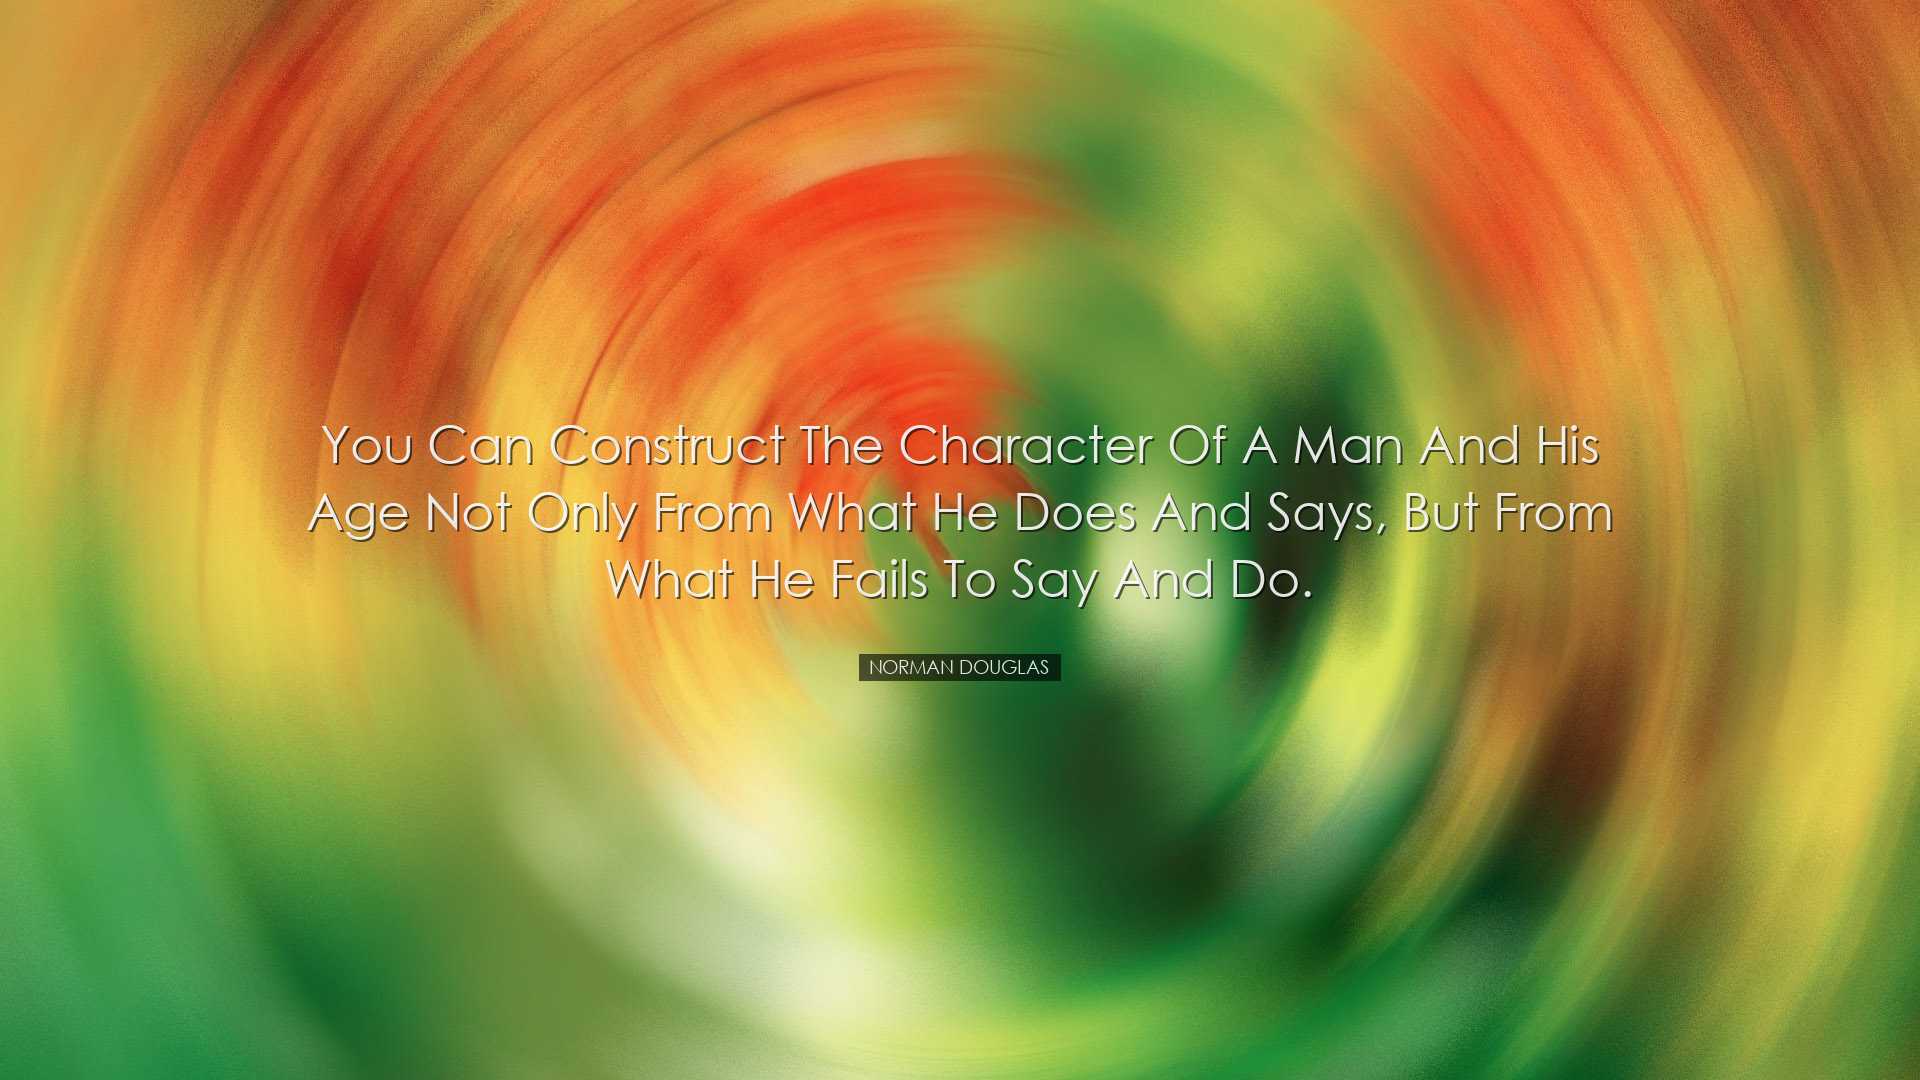 You can construct the character of a man and his age not only from